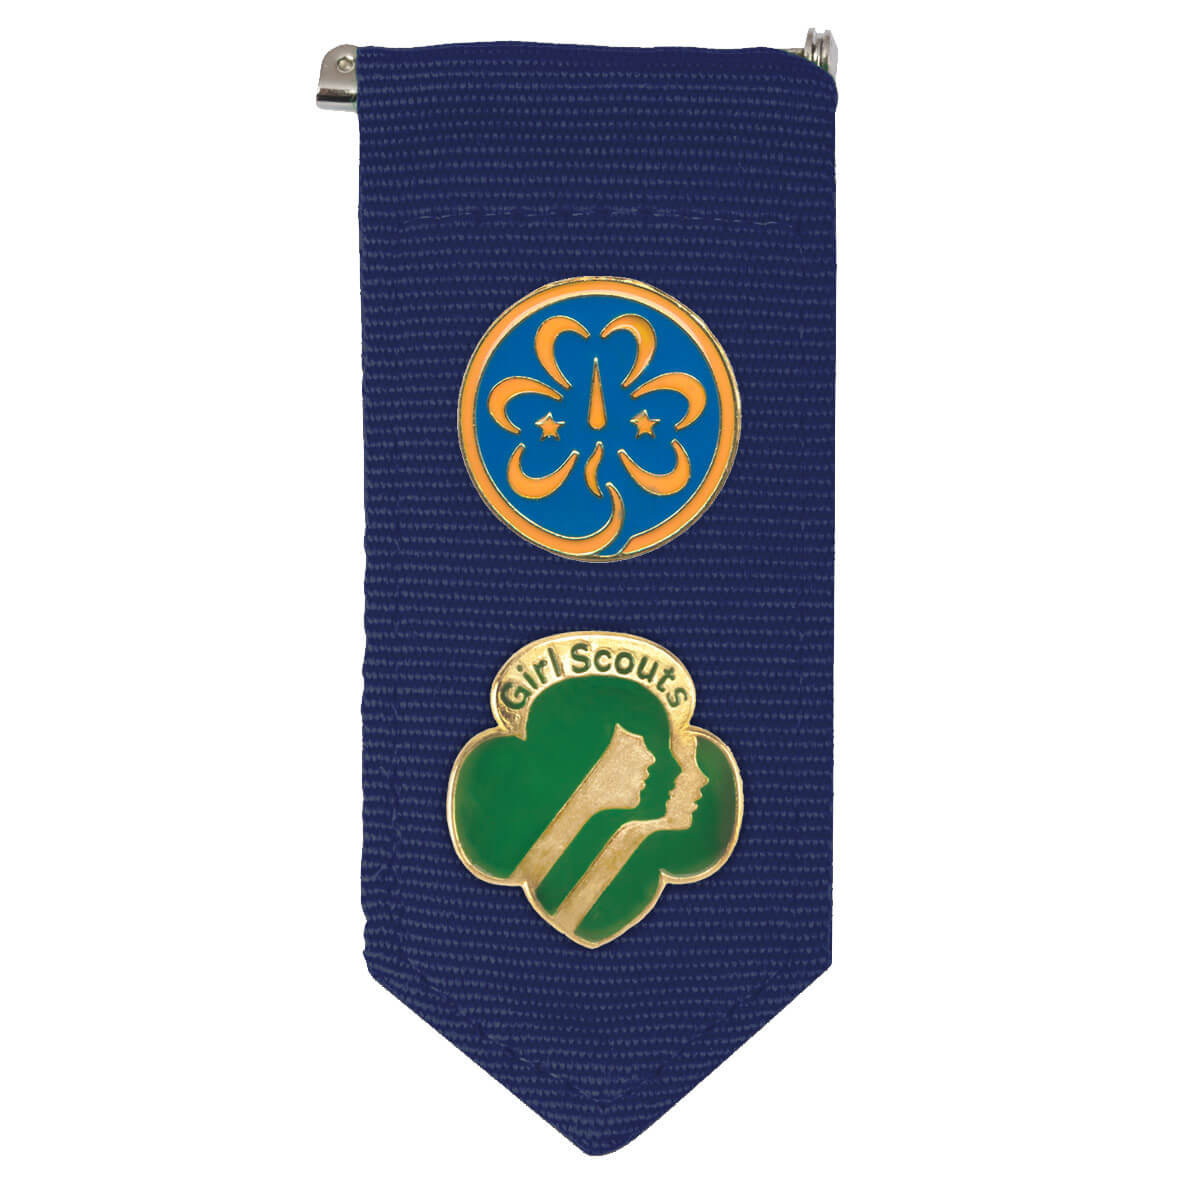 Girl Scouts 14151 Insignia Tab, Polyester, Navy Blue - 2